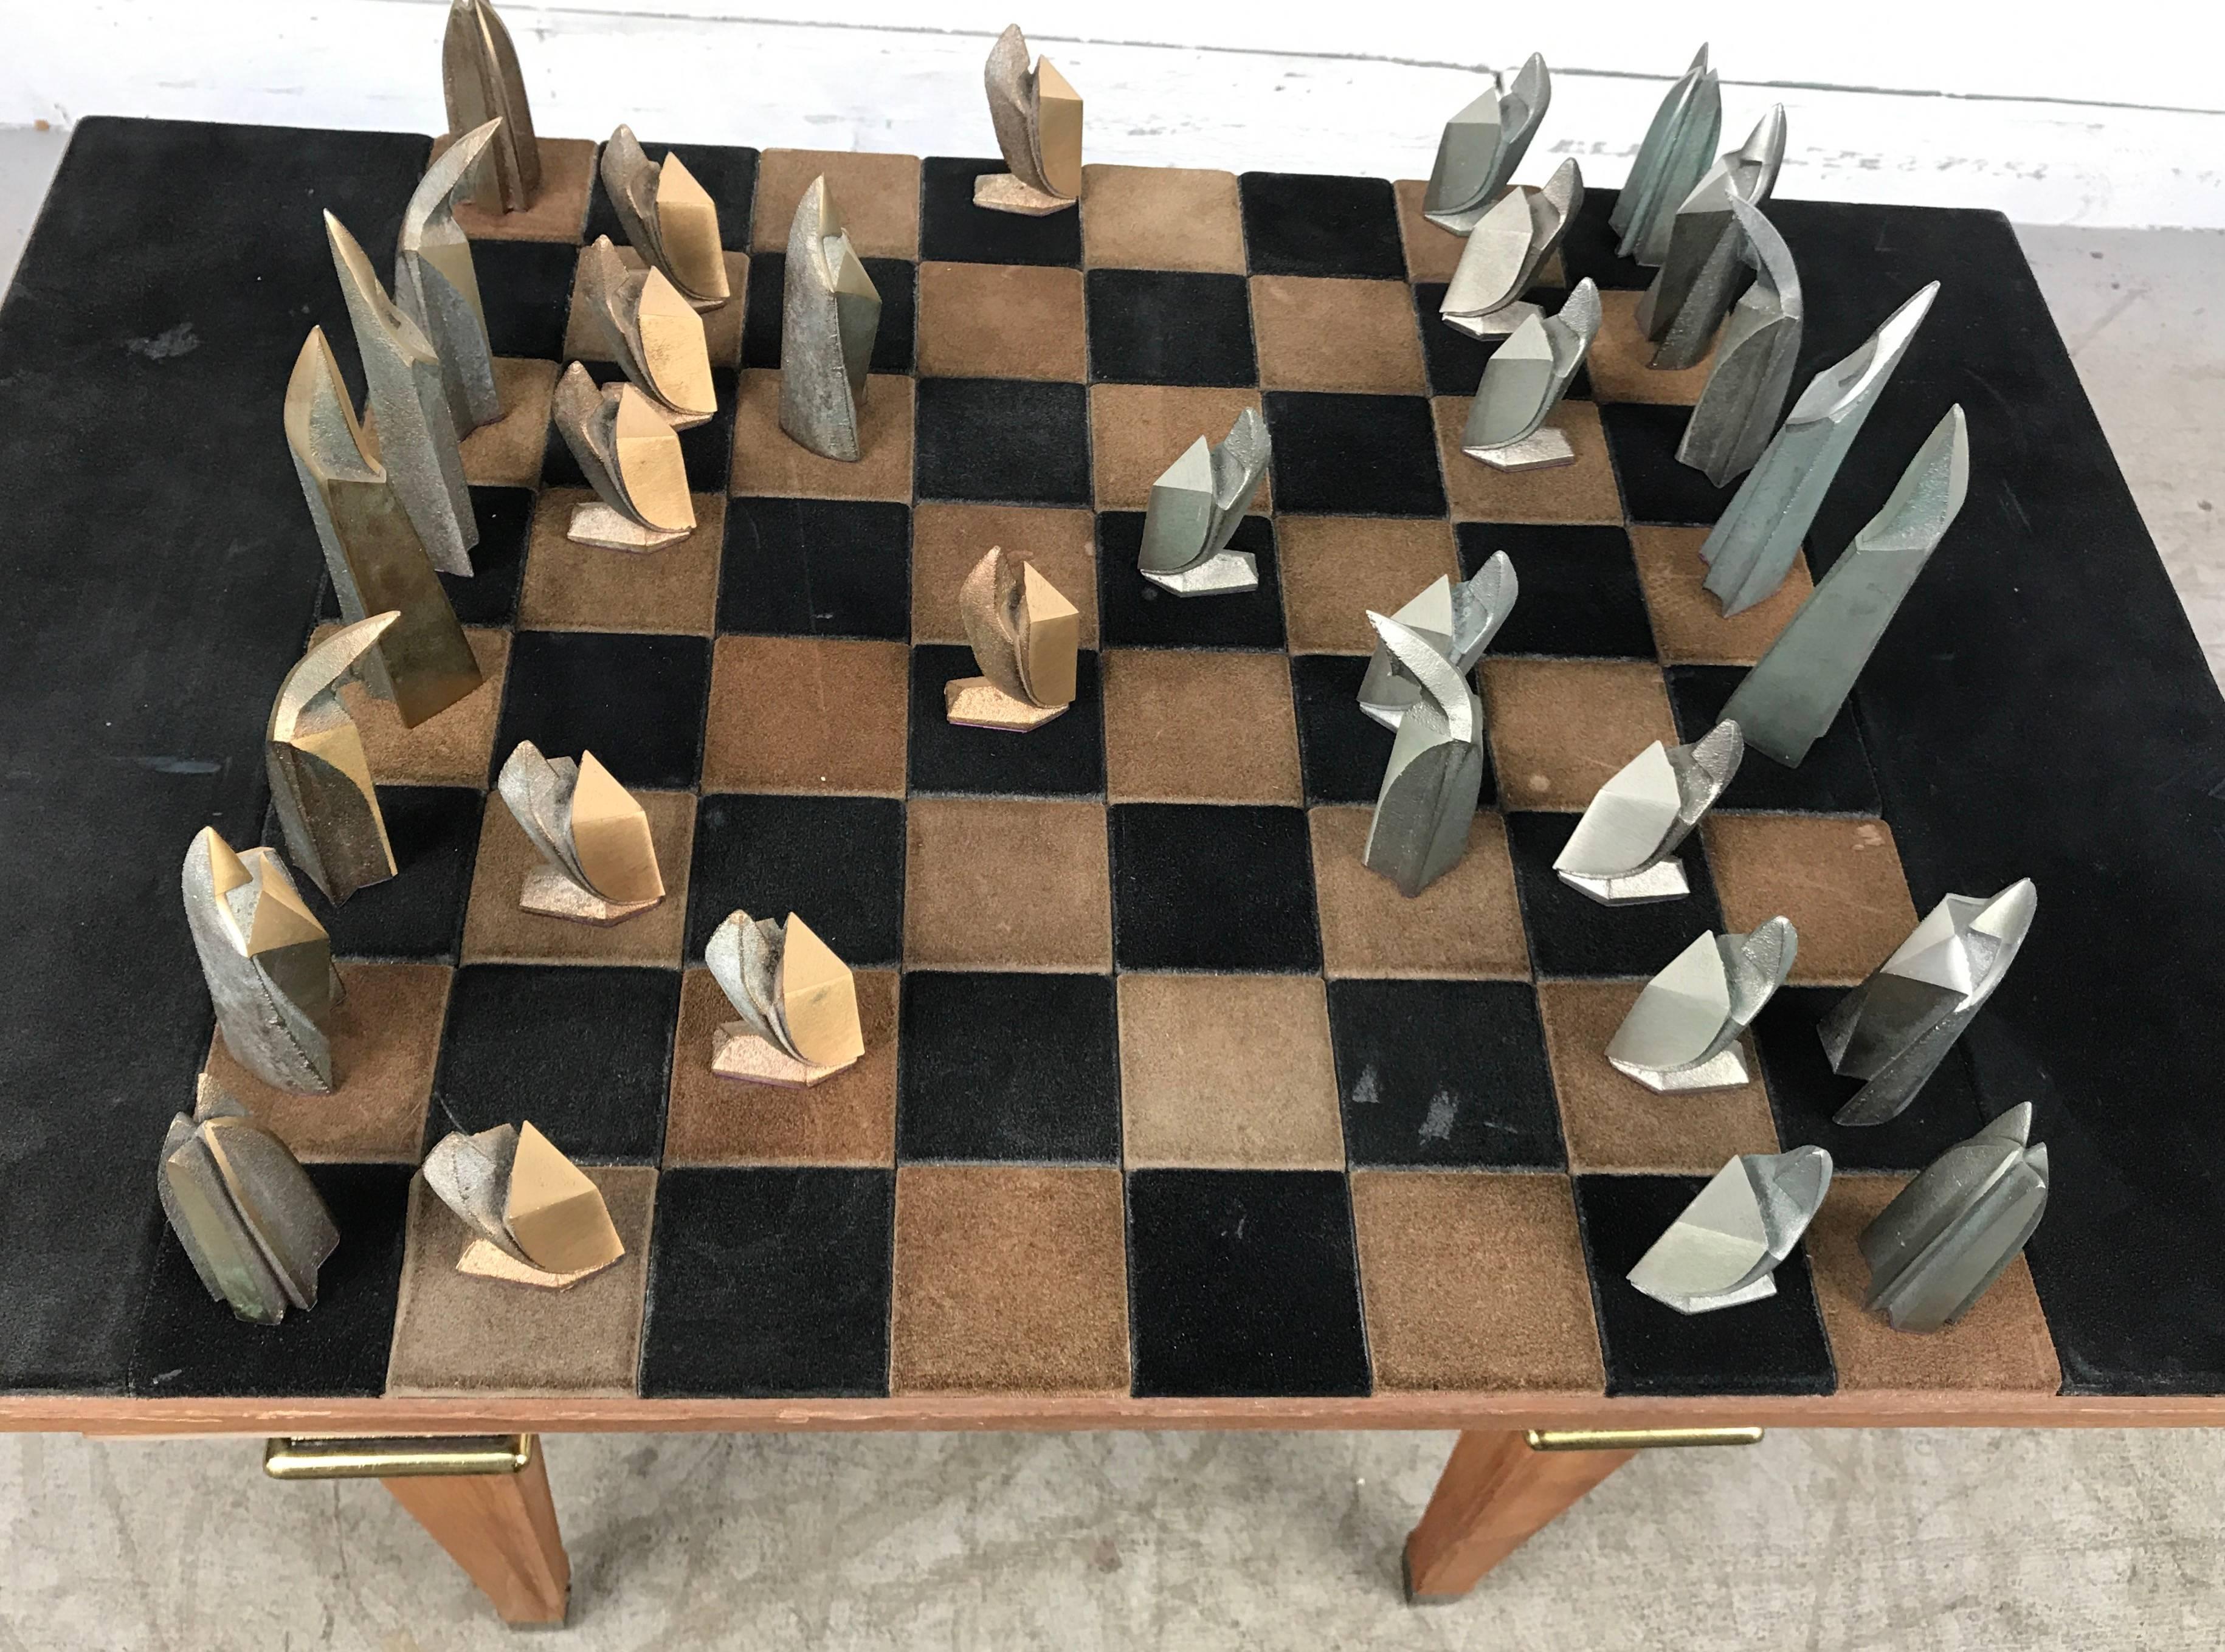 Unusual Modernist Chess Set. Bronze and steel stylized pieces. Cubist. Art Deco. Retains original suede wrapped board. Origin / maker unknown, possibly european